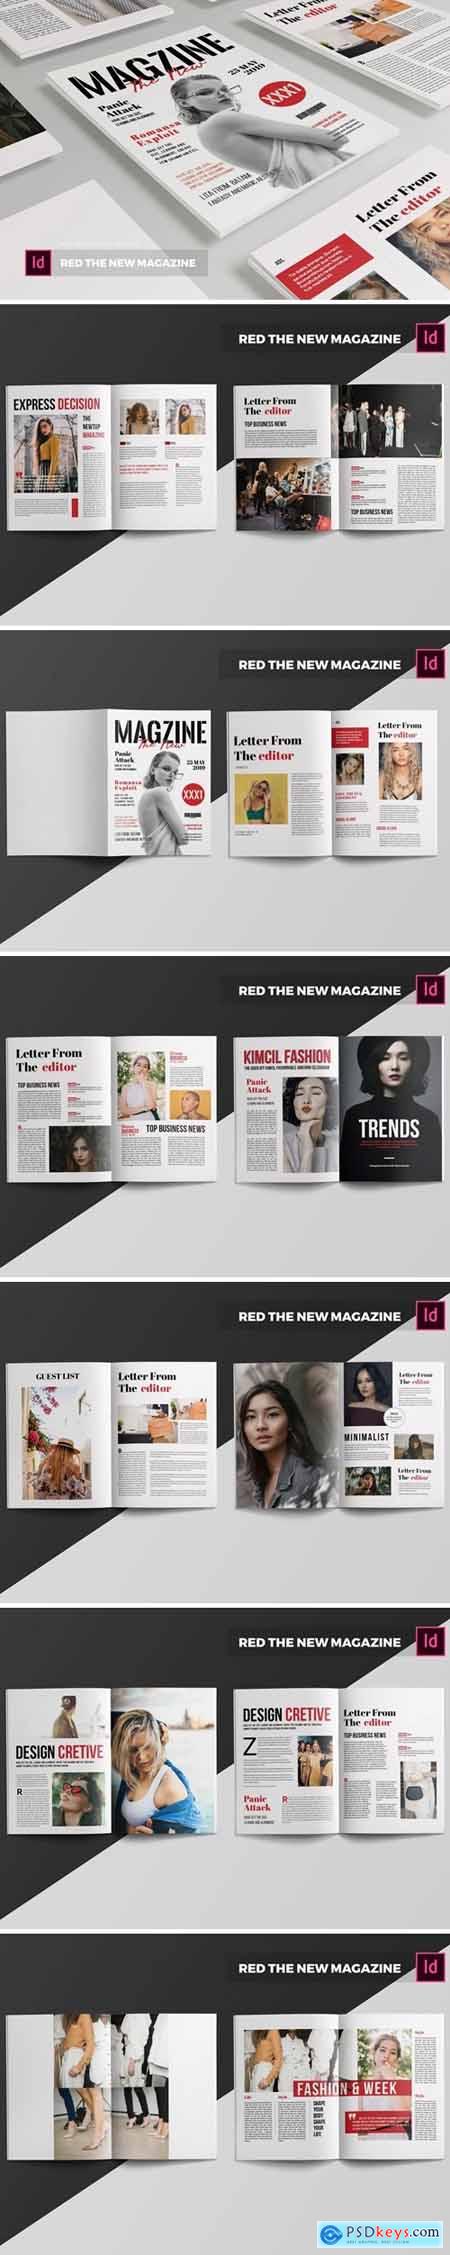 Red The New Magazine Template